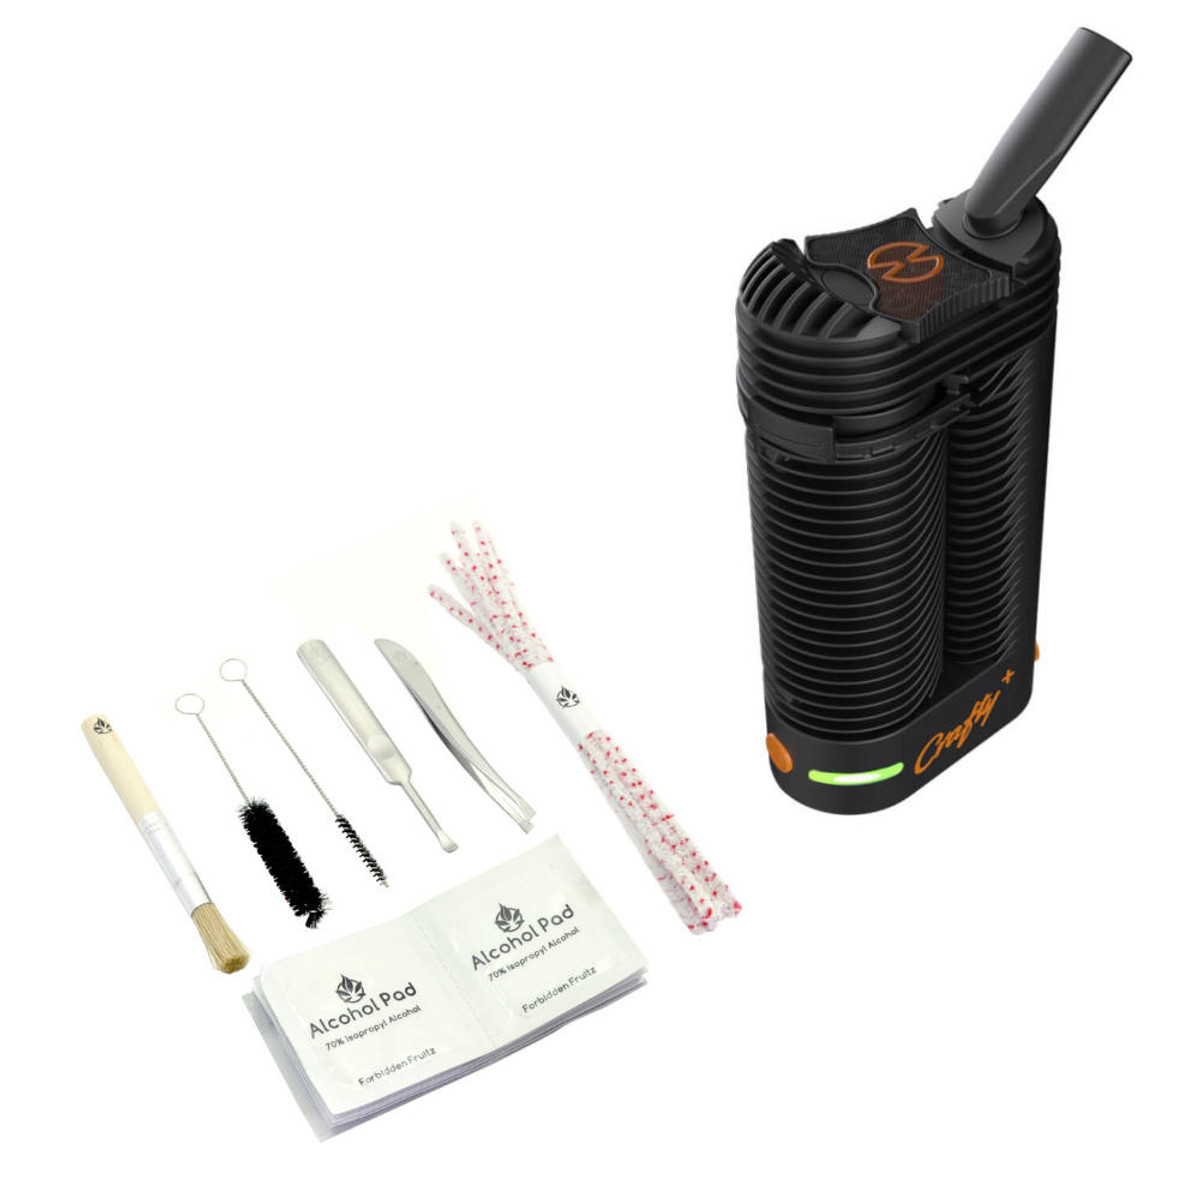 Storz and Bickel Storz and Bickel CRAFTY Portable Vaporiser and Cleaning Kit